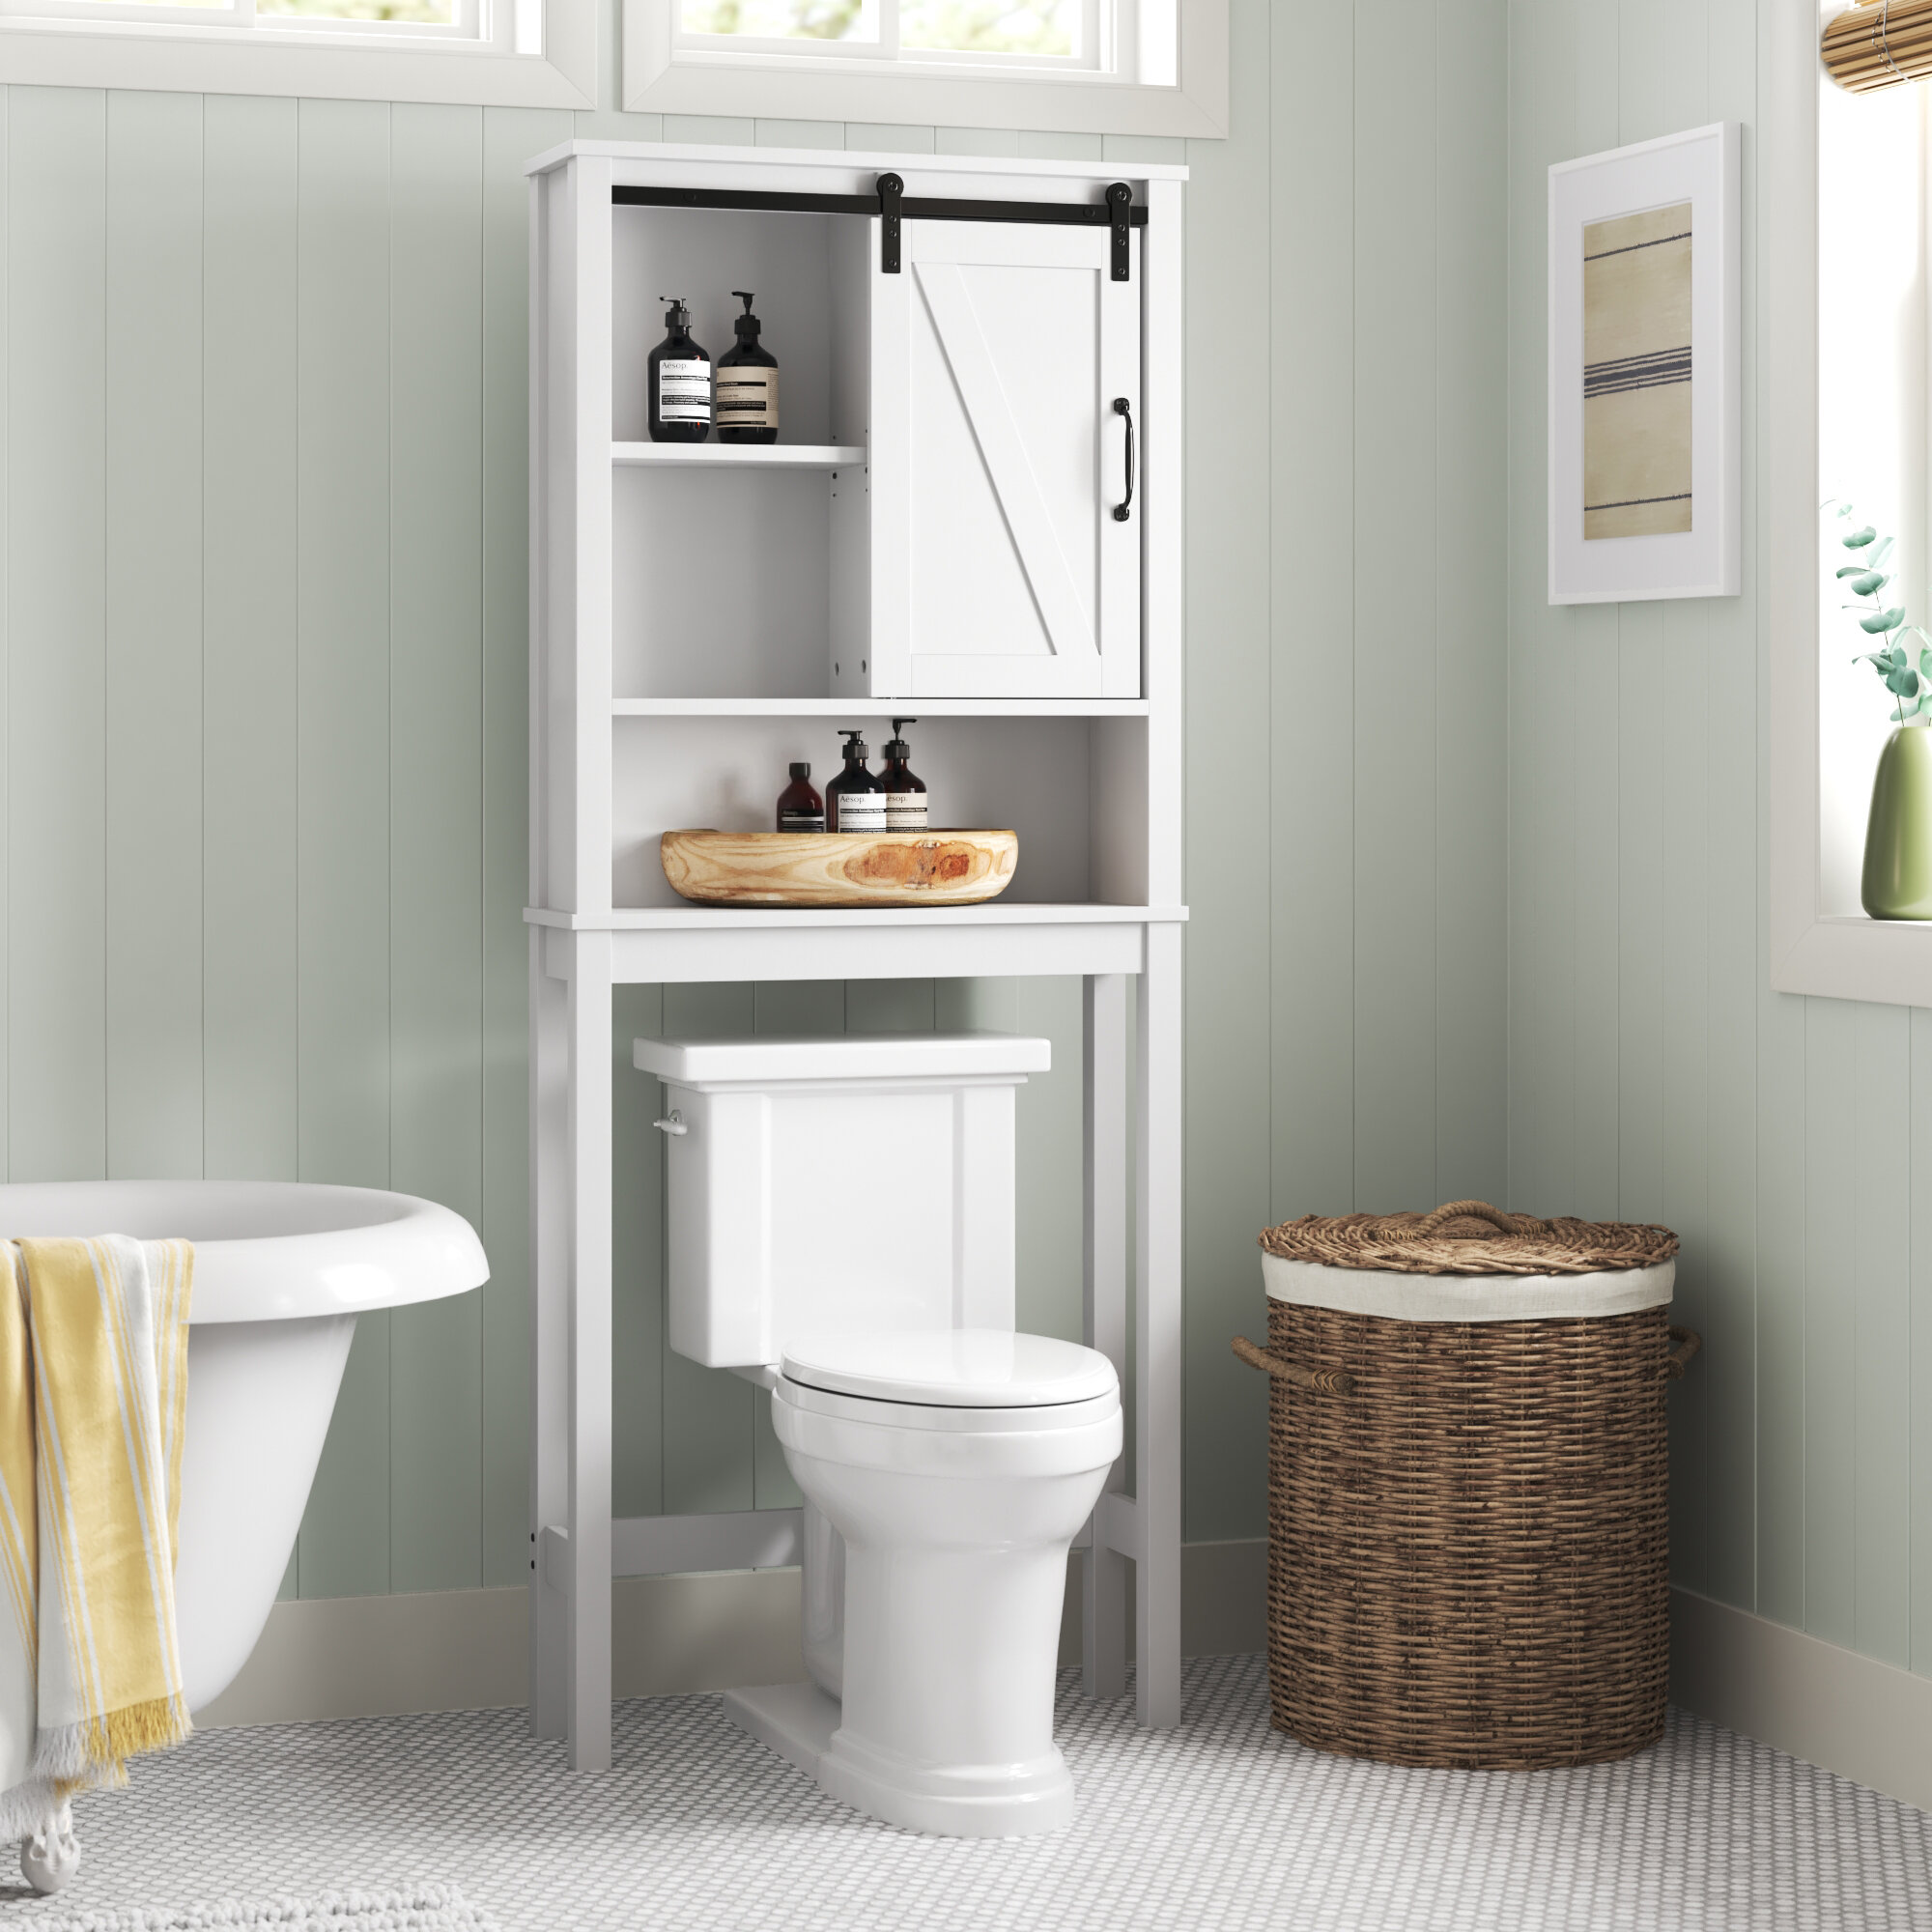 Sand & Stable Morada Freestanding Over-the-Toilet Storage & Reviews